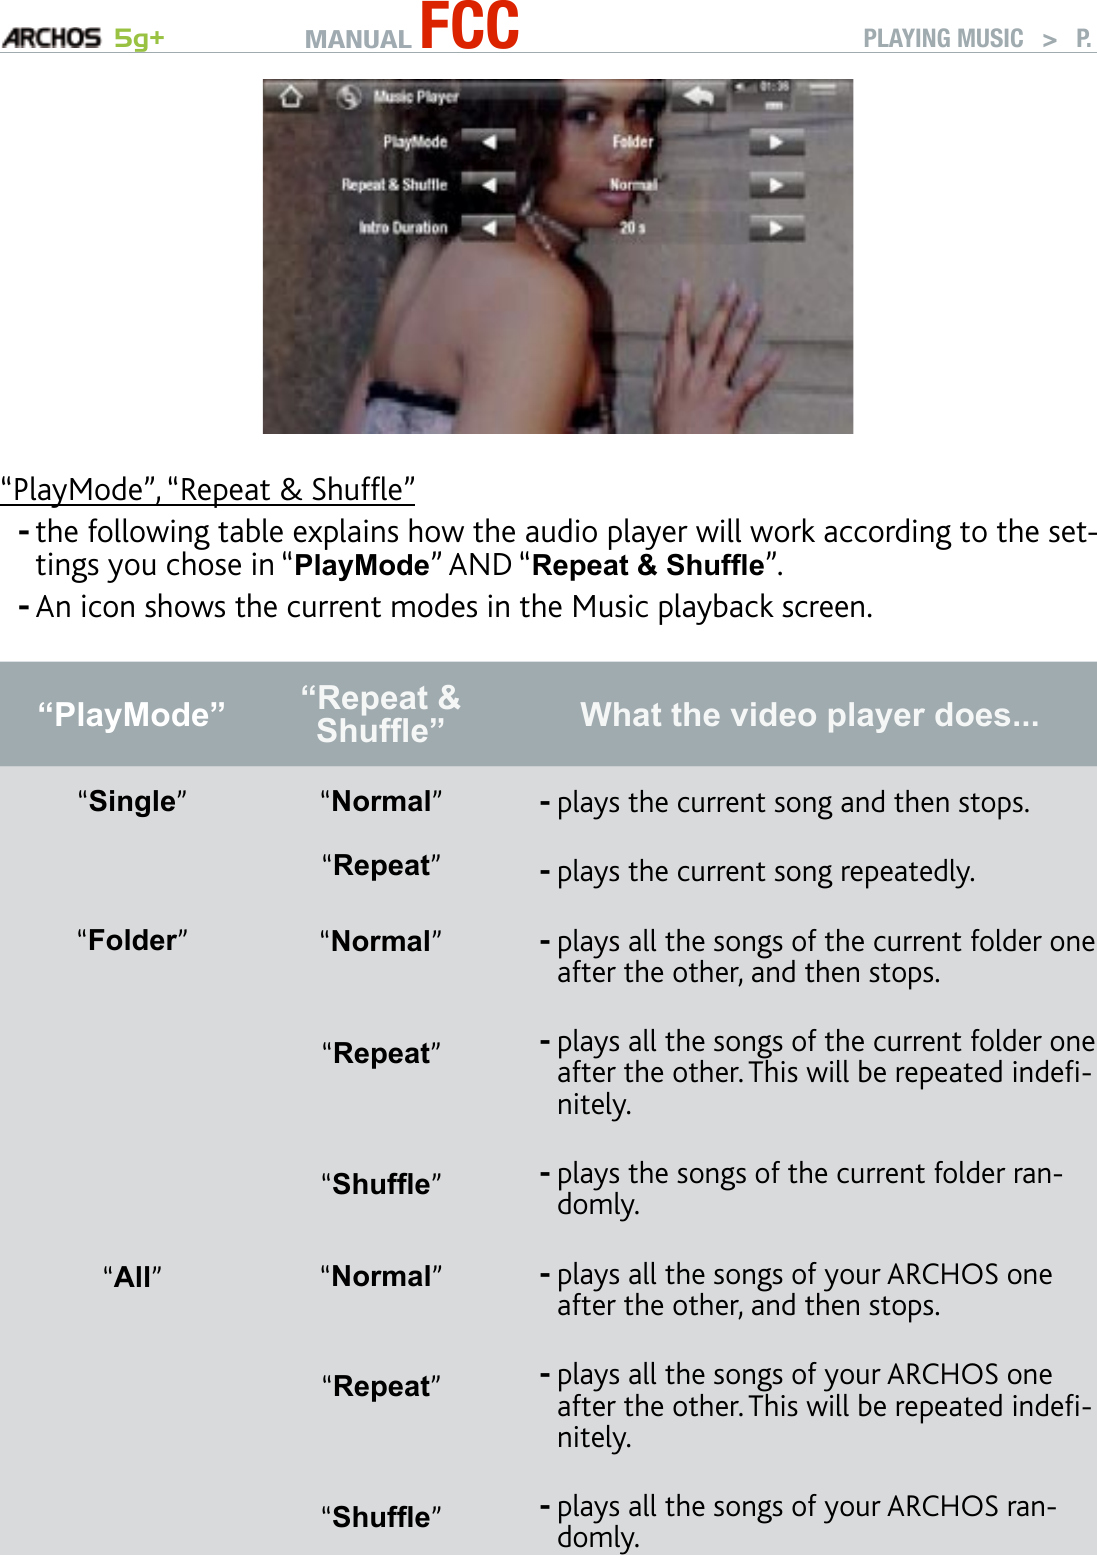 MANUAL FCC 5g+ PLAYING MUSIC   &gt;   P. 19“PlayMode”, “Repeat &amp; Shufe”the following table explains how the audio player will work according to the set-tings you chose in “PlayMode” AND “Repeat &amp; Shufe”. An icon shows the current modes in the Music playback screen.“PlayMode”  “Repeat &amp; Shufe” What the video player does...“Single”“Normal”plays the current song and then stops.-“Repeat”plays the current song repeatedly.-“Folder”“Normal” plays all the songs of the current folder one after the other, and then stops.-“Repeat”plays all the songs of the current folder one after the other. This will be repeated inde-nitely.-“Shufe”plays the songs of the current folder ran-domly.-“All”“Normal”plays all the songs of your ARCHOS one after the other, and then stops.-“Repeat”plays all the songs of your ARCHOS one after the other. This will be repeated inde-nitely.-“Shufe”plays all the songs of your ARCHOS ran-domly.---